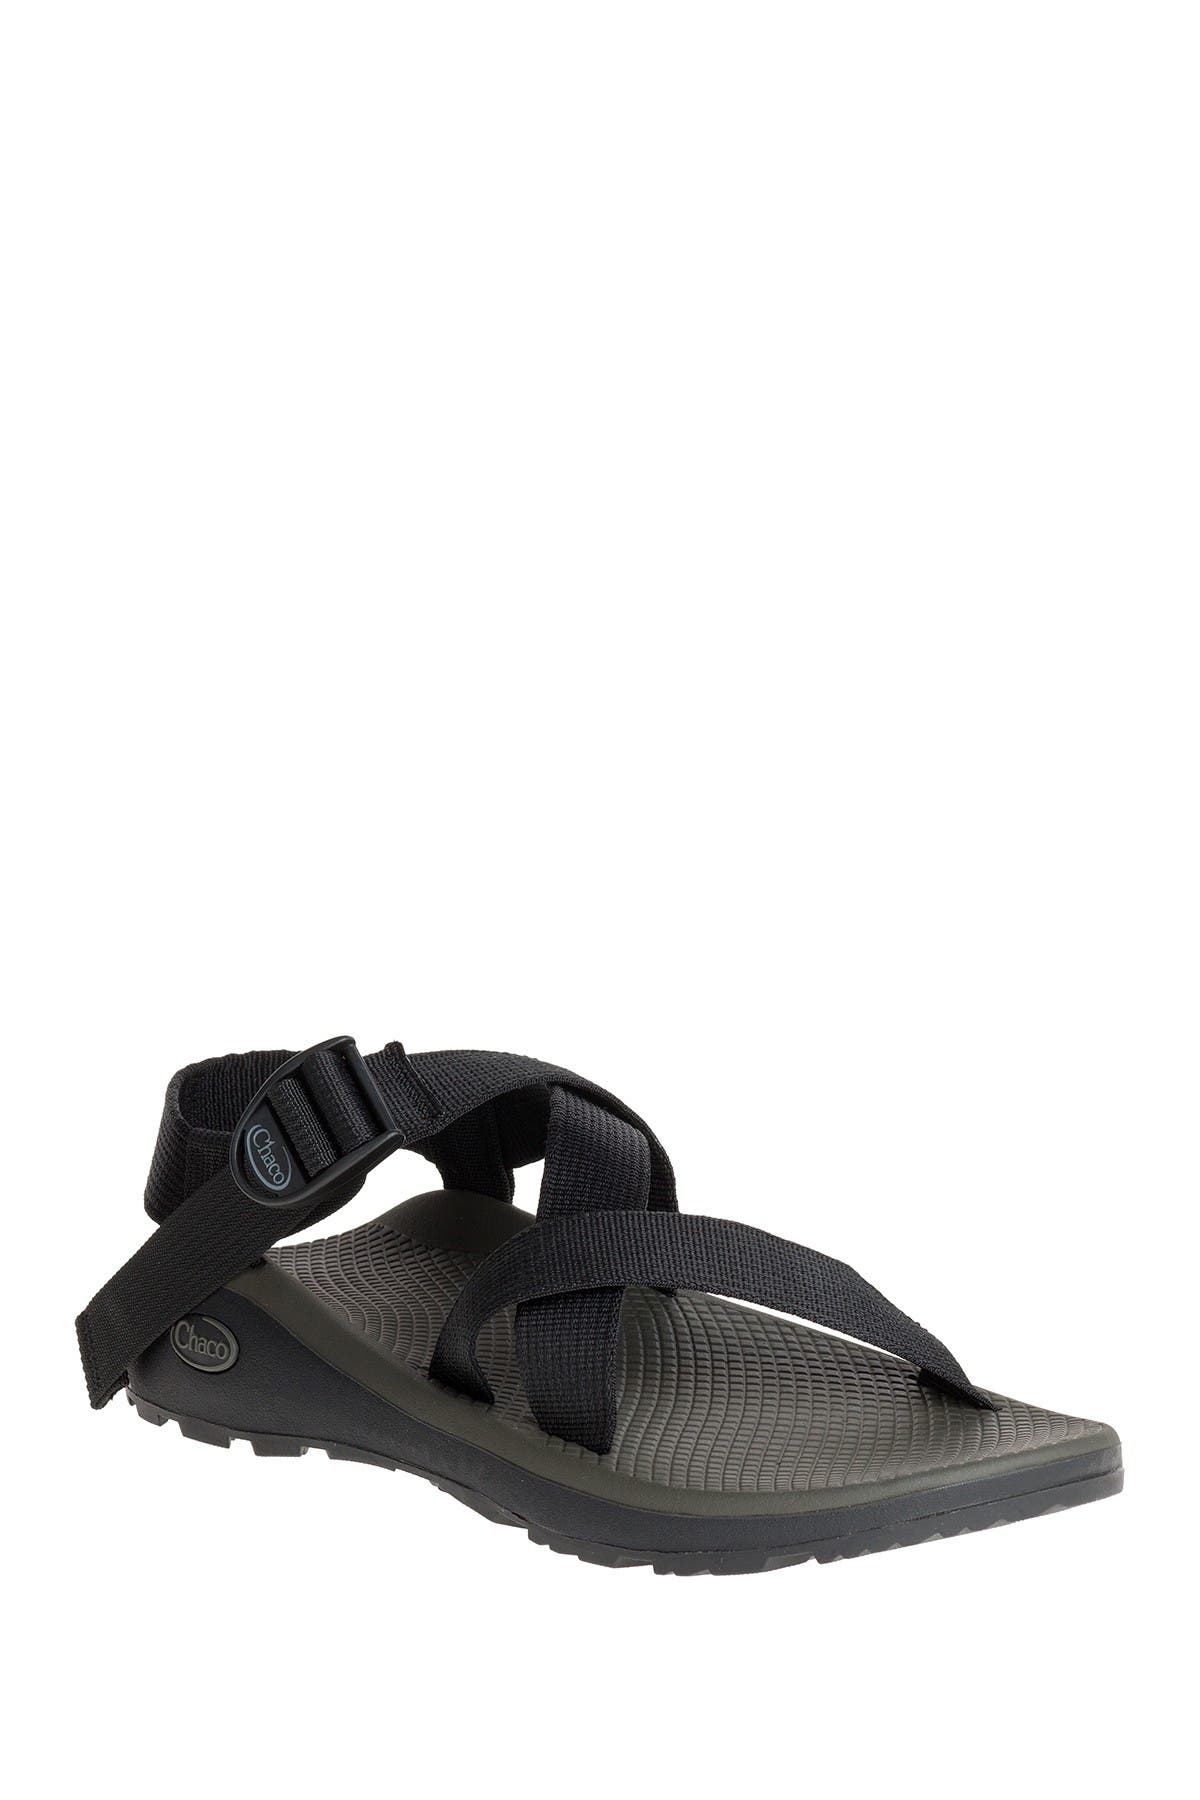 mens chacos size 8